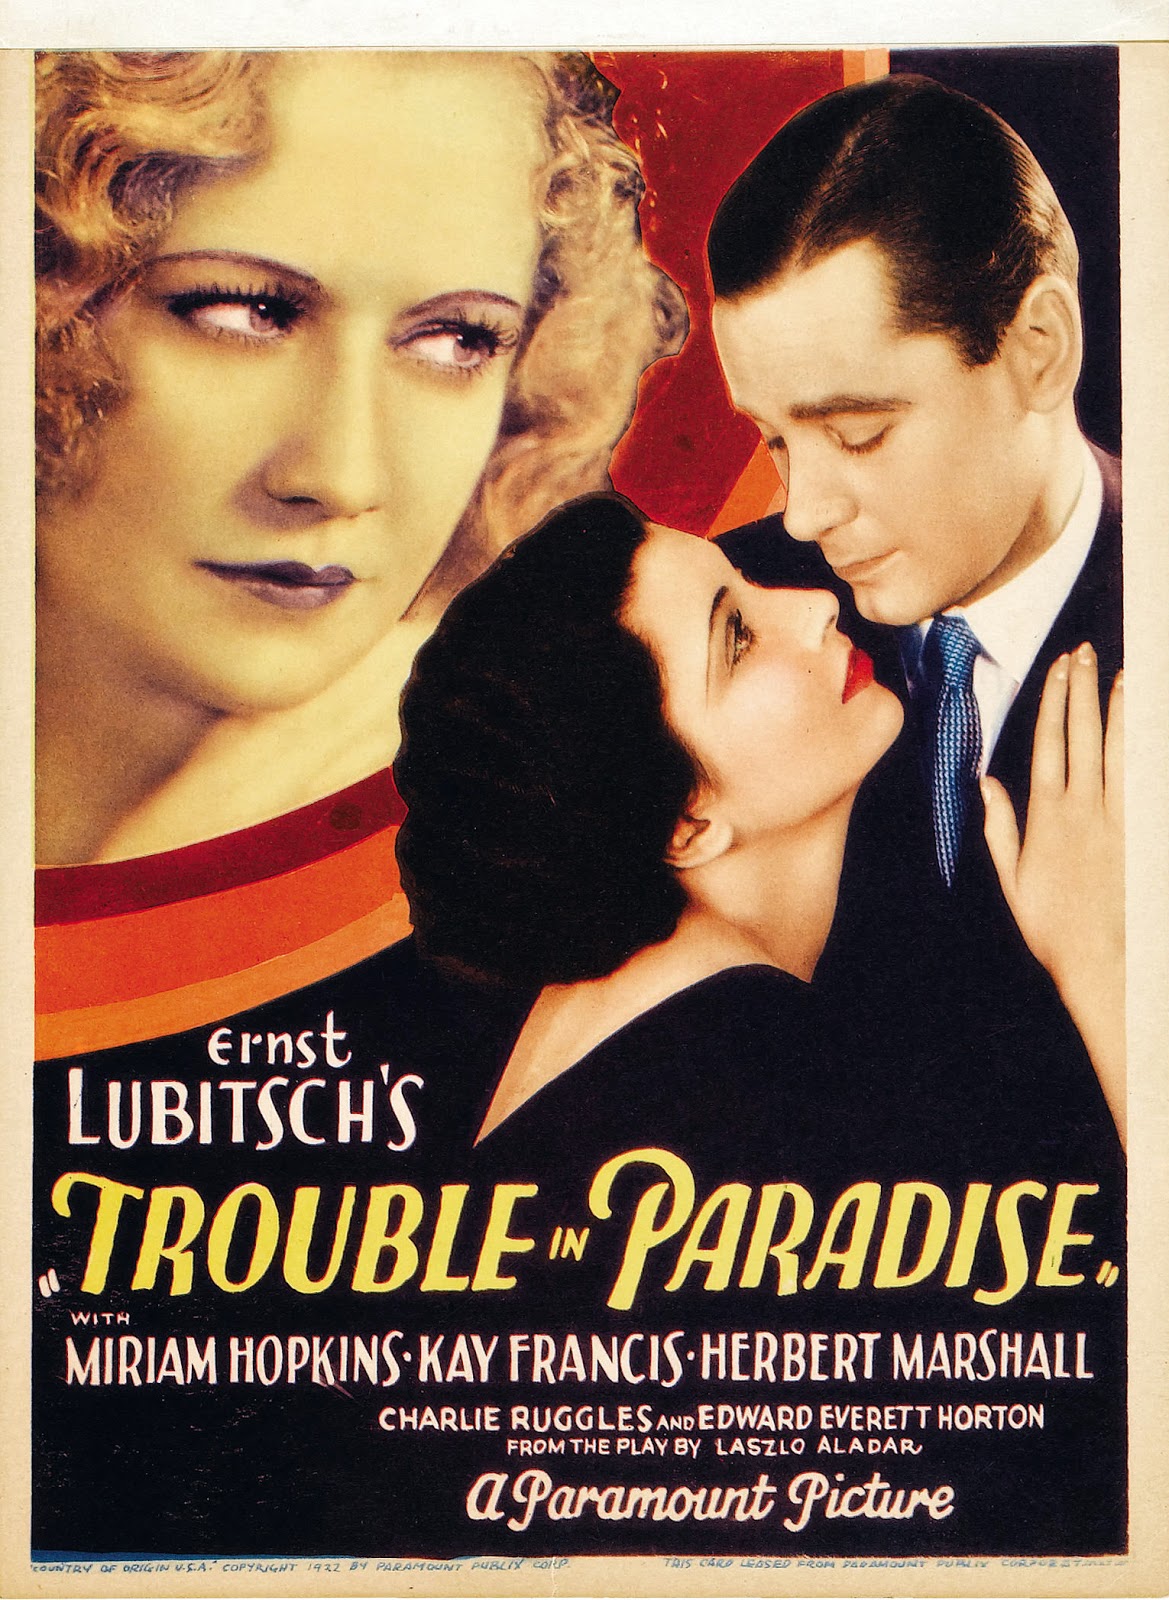 Screen Insight: Trouble in Paradise (Ernst Lubitsch, 1932)